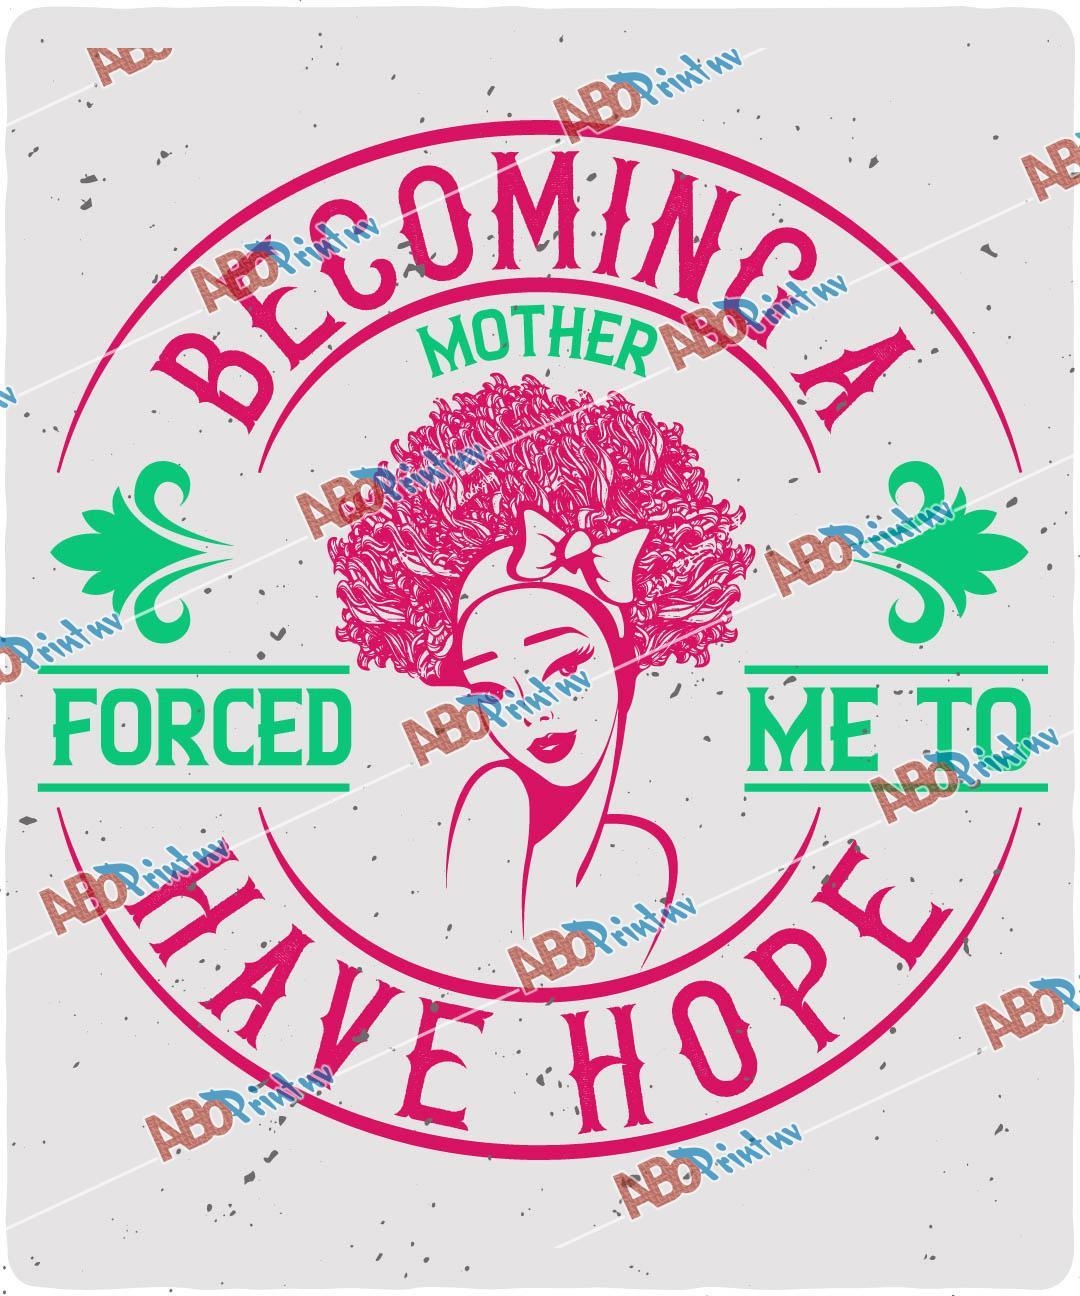 Becoming a mother forced me to have hope V2.jpg